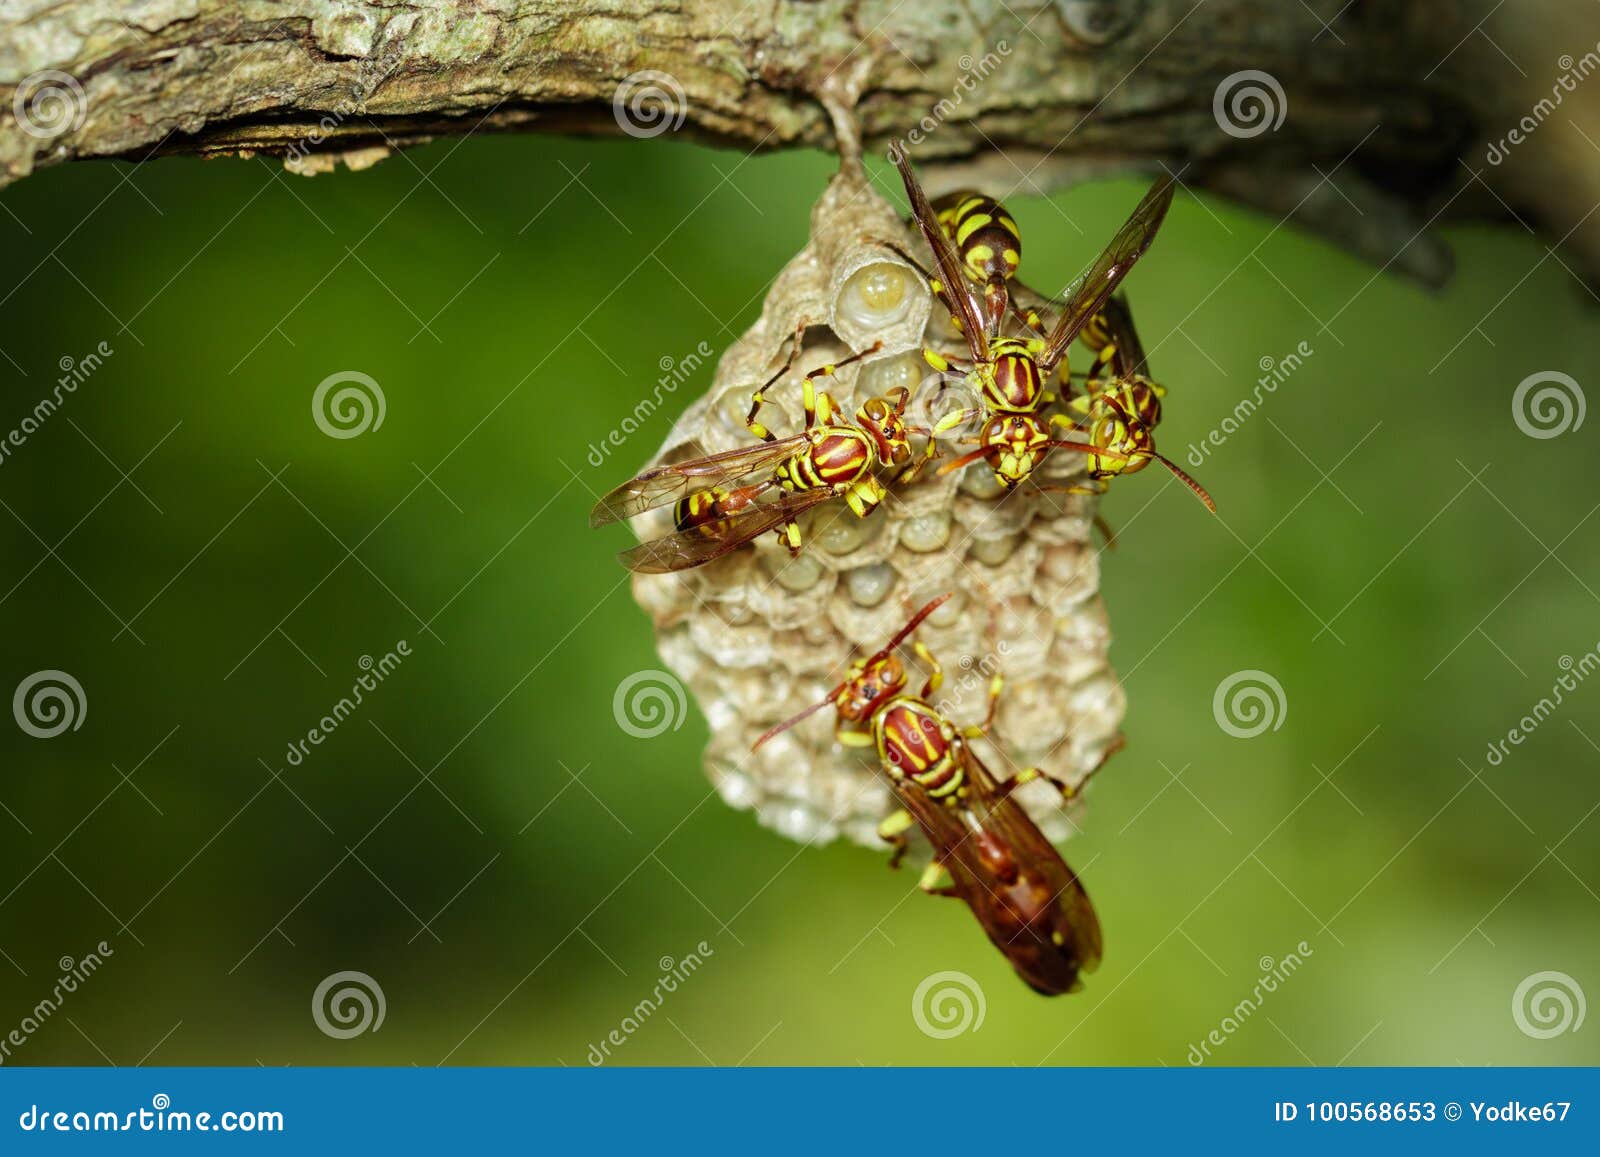 Image of Apache Wasp Apachus and Wasp Nest on Natu Stock - Image of comb, queen: 100568653